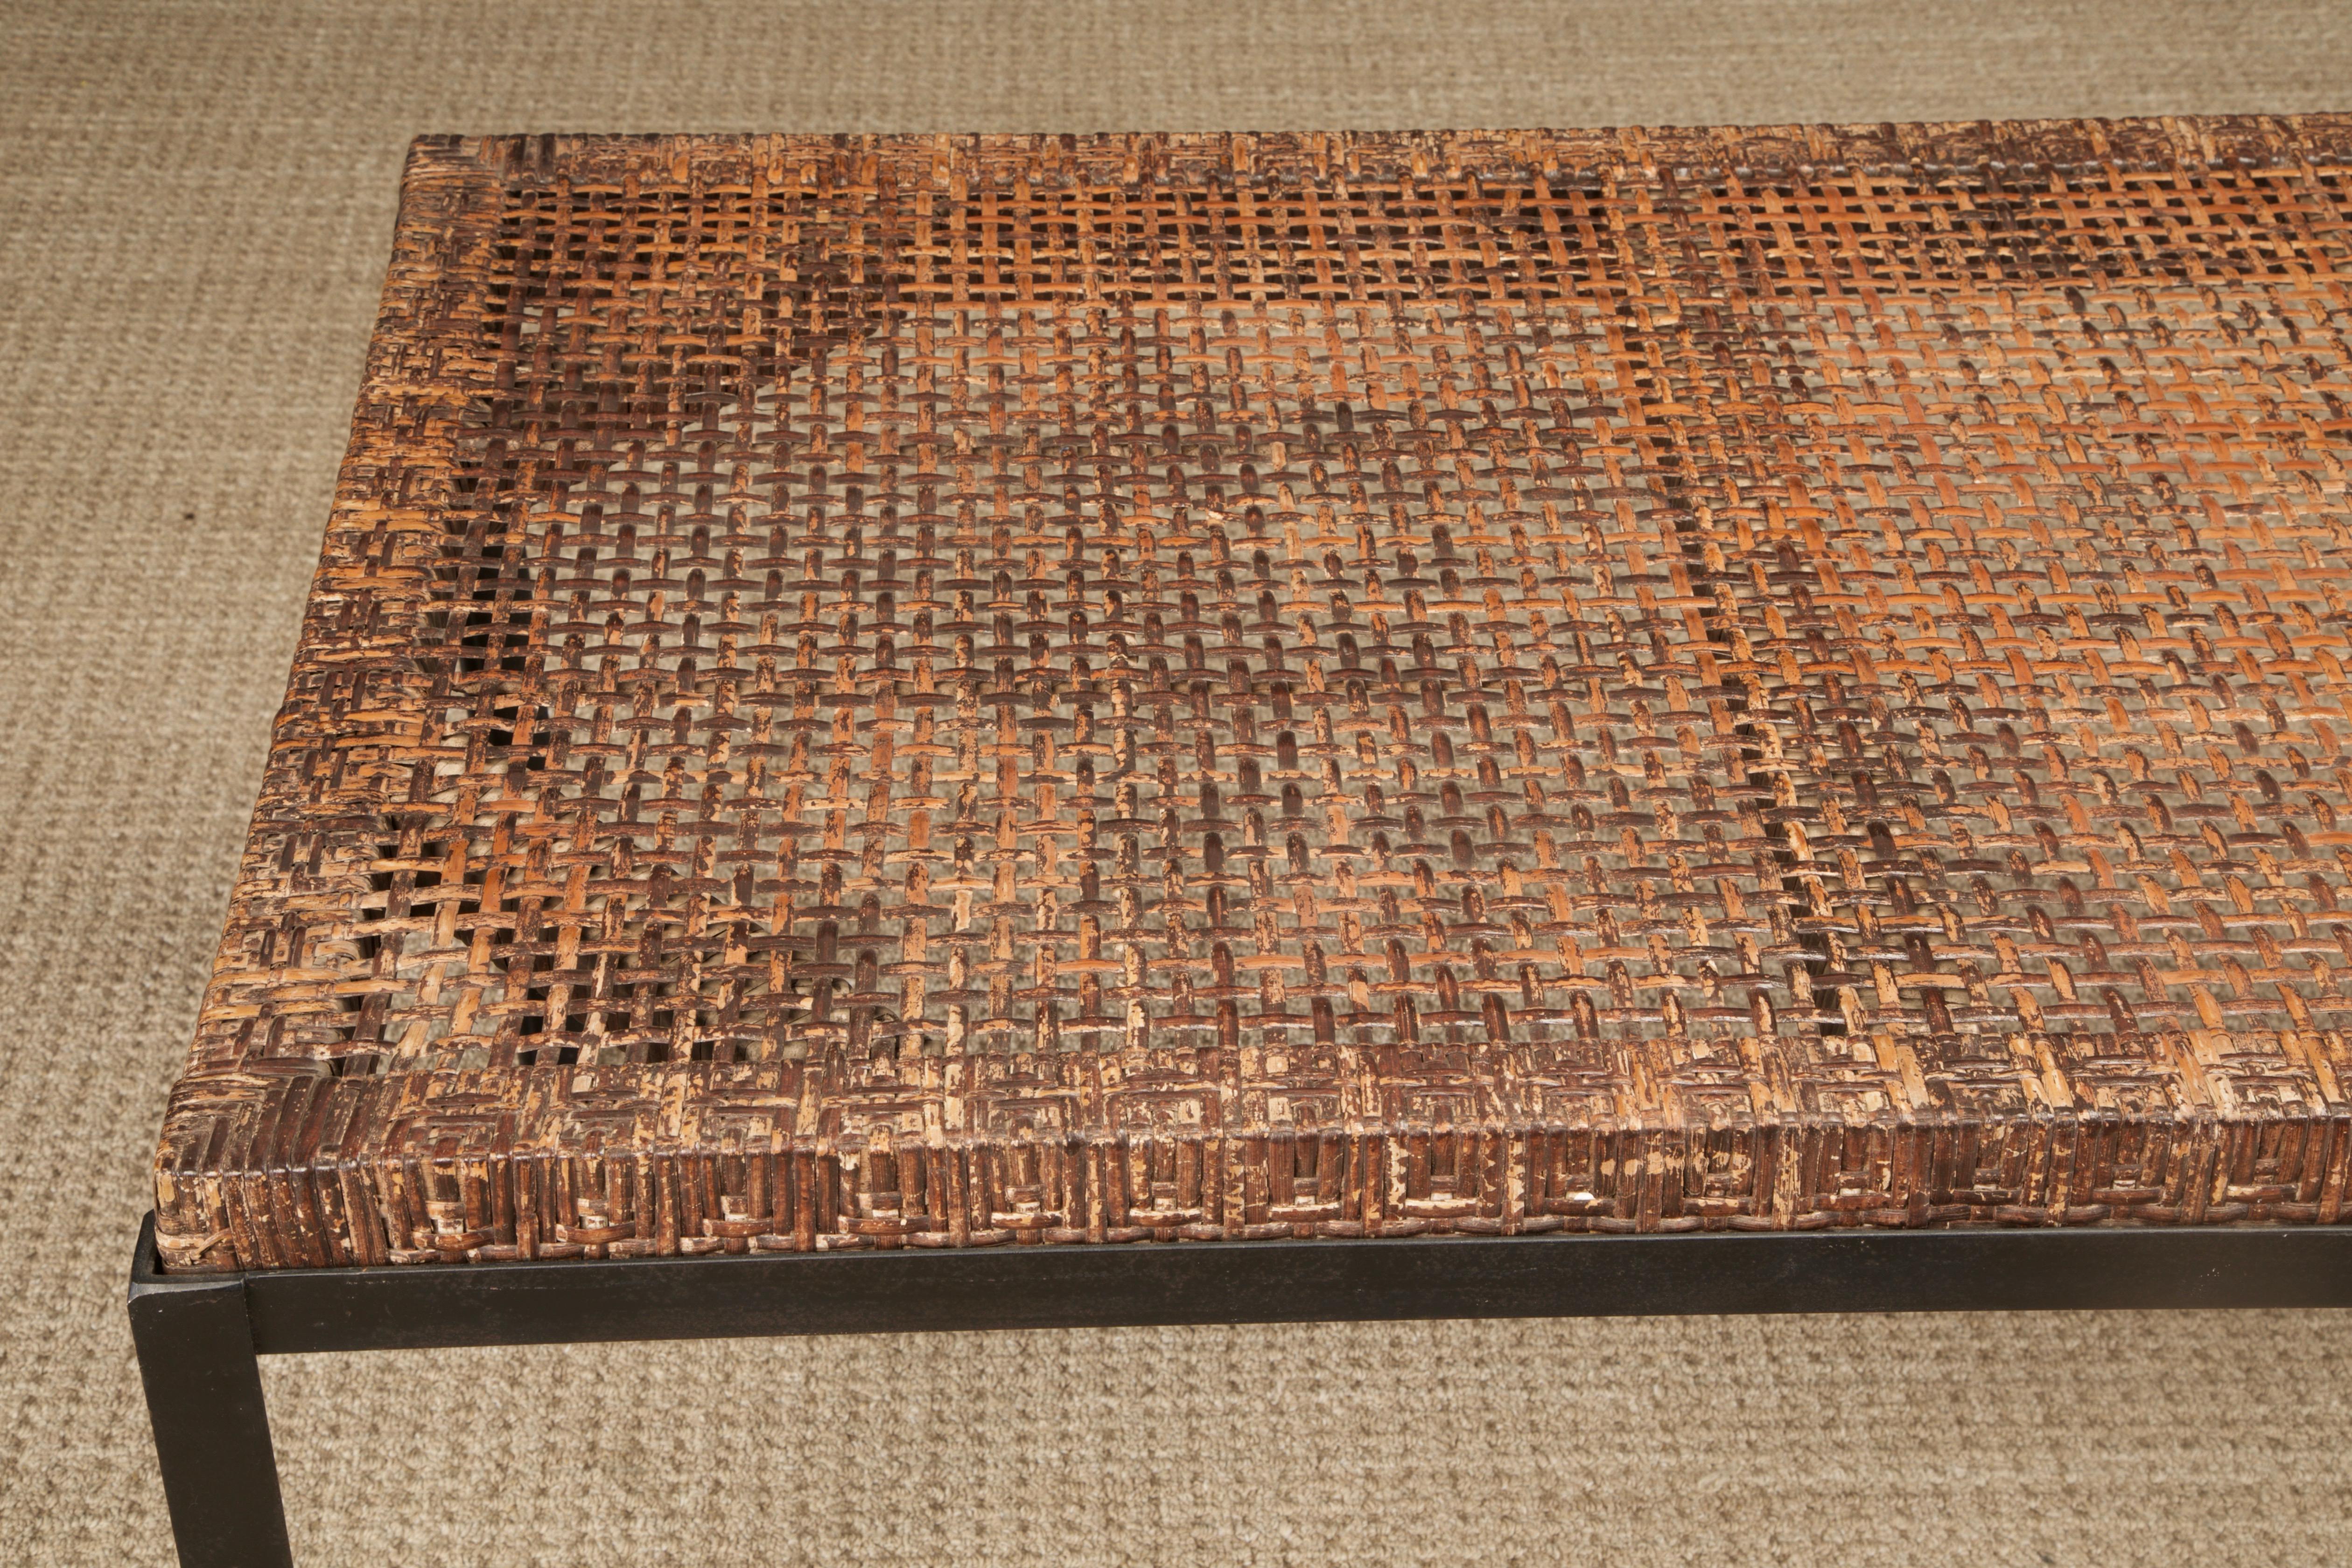 Caned Dining Table by Danny Ho Fong for Tropi-cal in Iron and Rattan, c 1960s For Sale 6